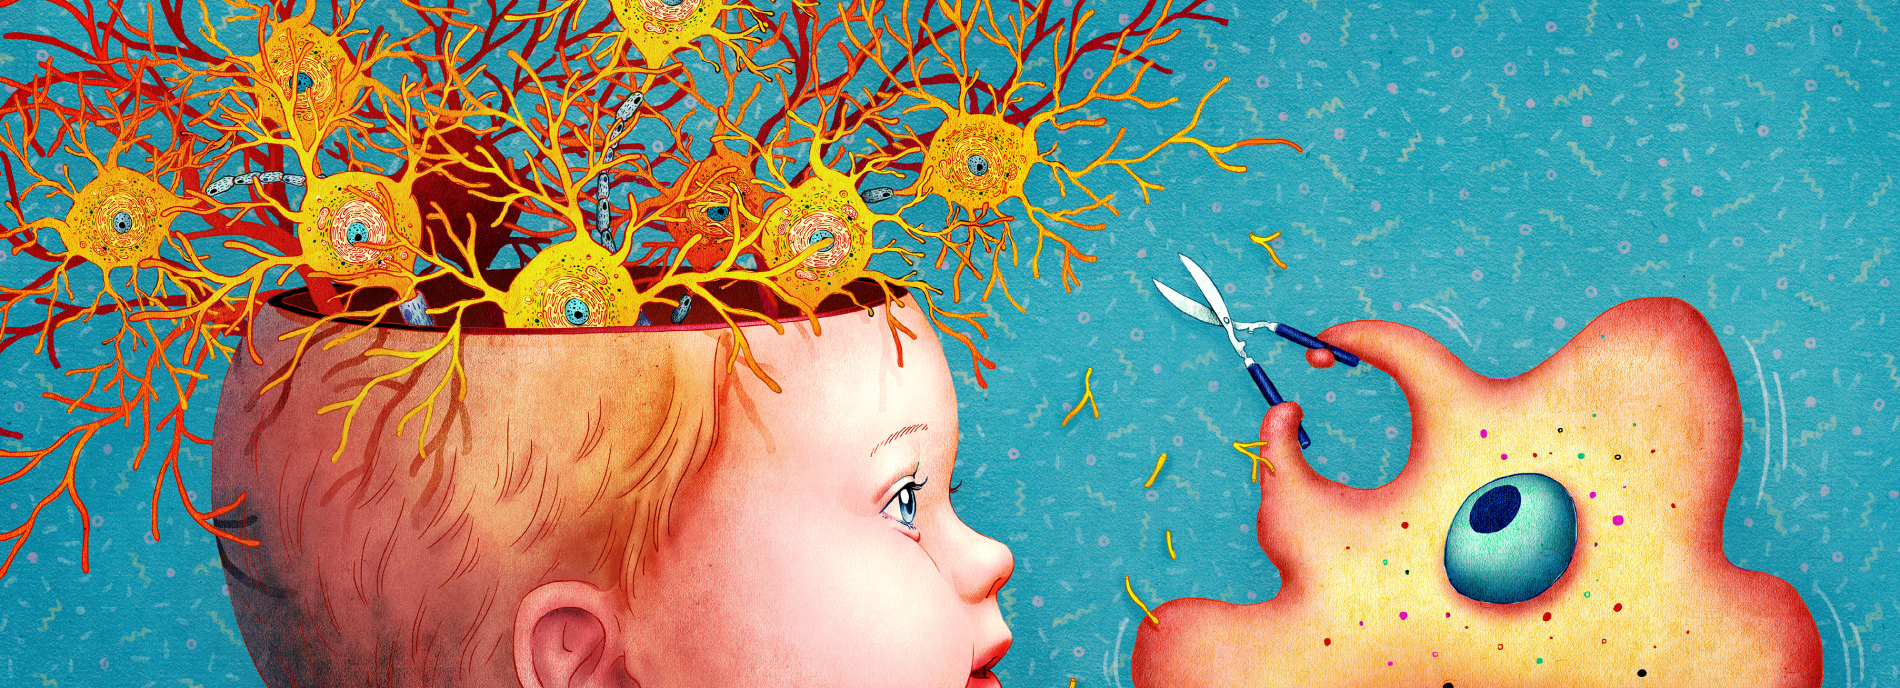 Dendrites bloom in a surreal manner from an infant's head. A microglia with a pair of shears comes in to prune the excess wiring, suggesting the role that microglia play in child brain development.